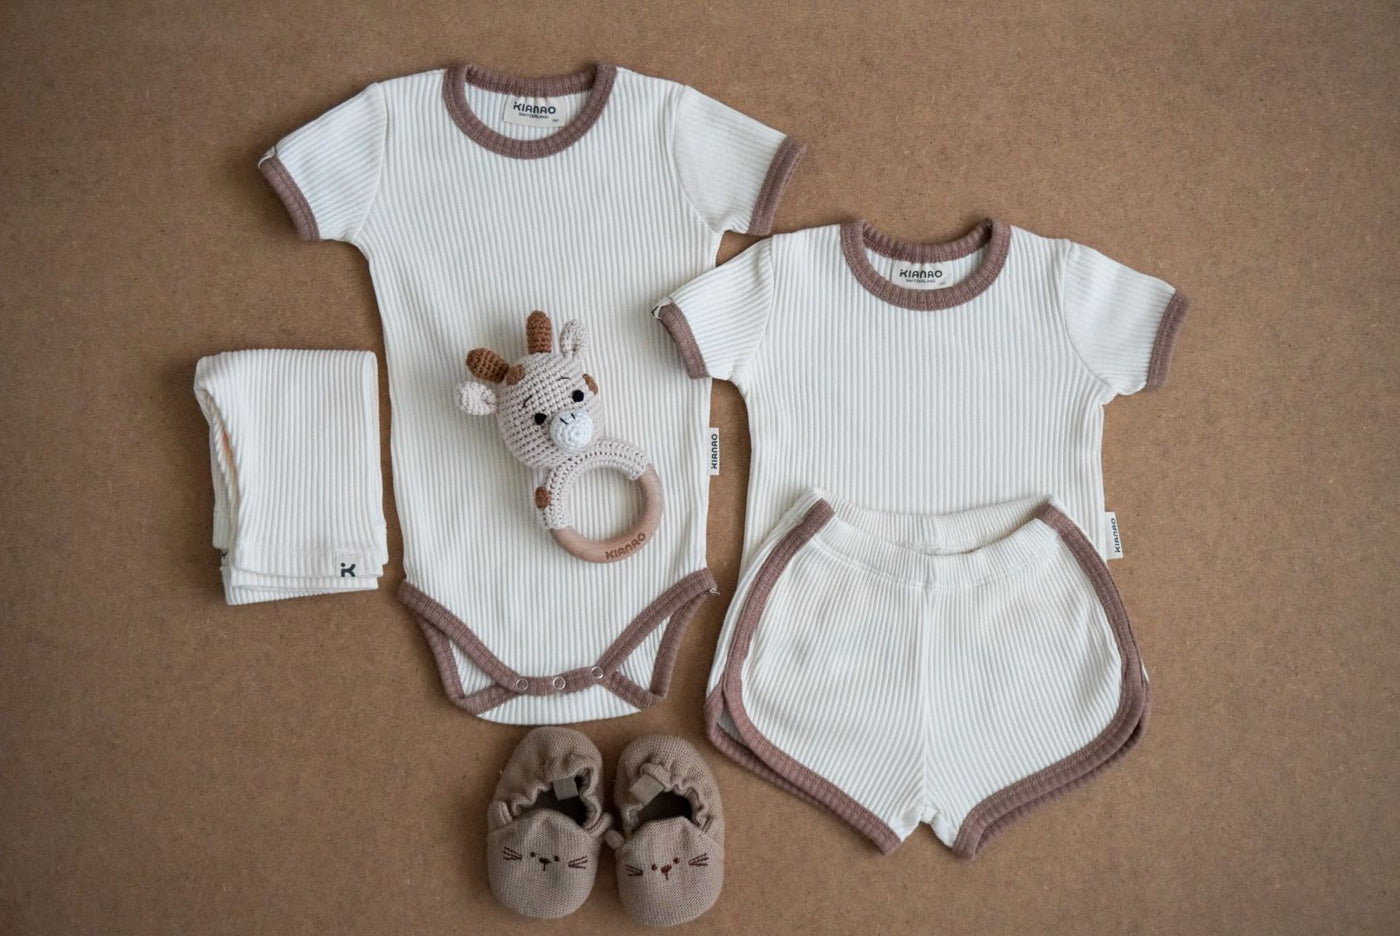 KIANAO Top-Rated Best-Selling Baby and Toddler Essentials Collection